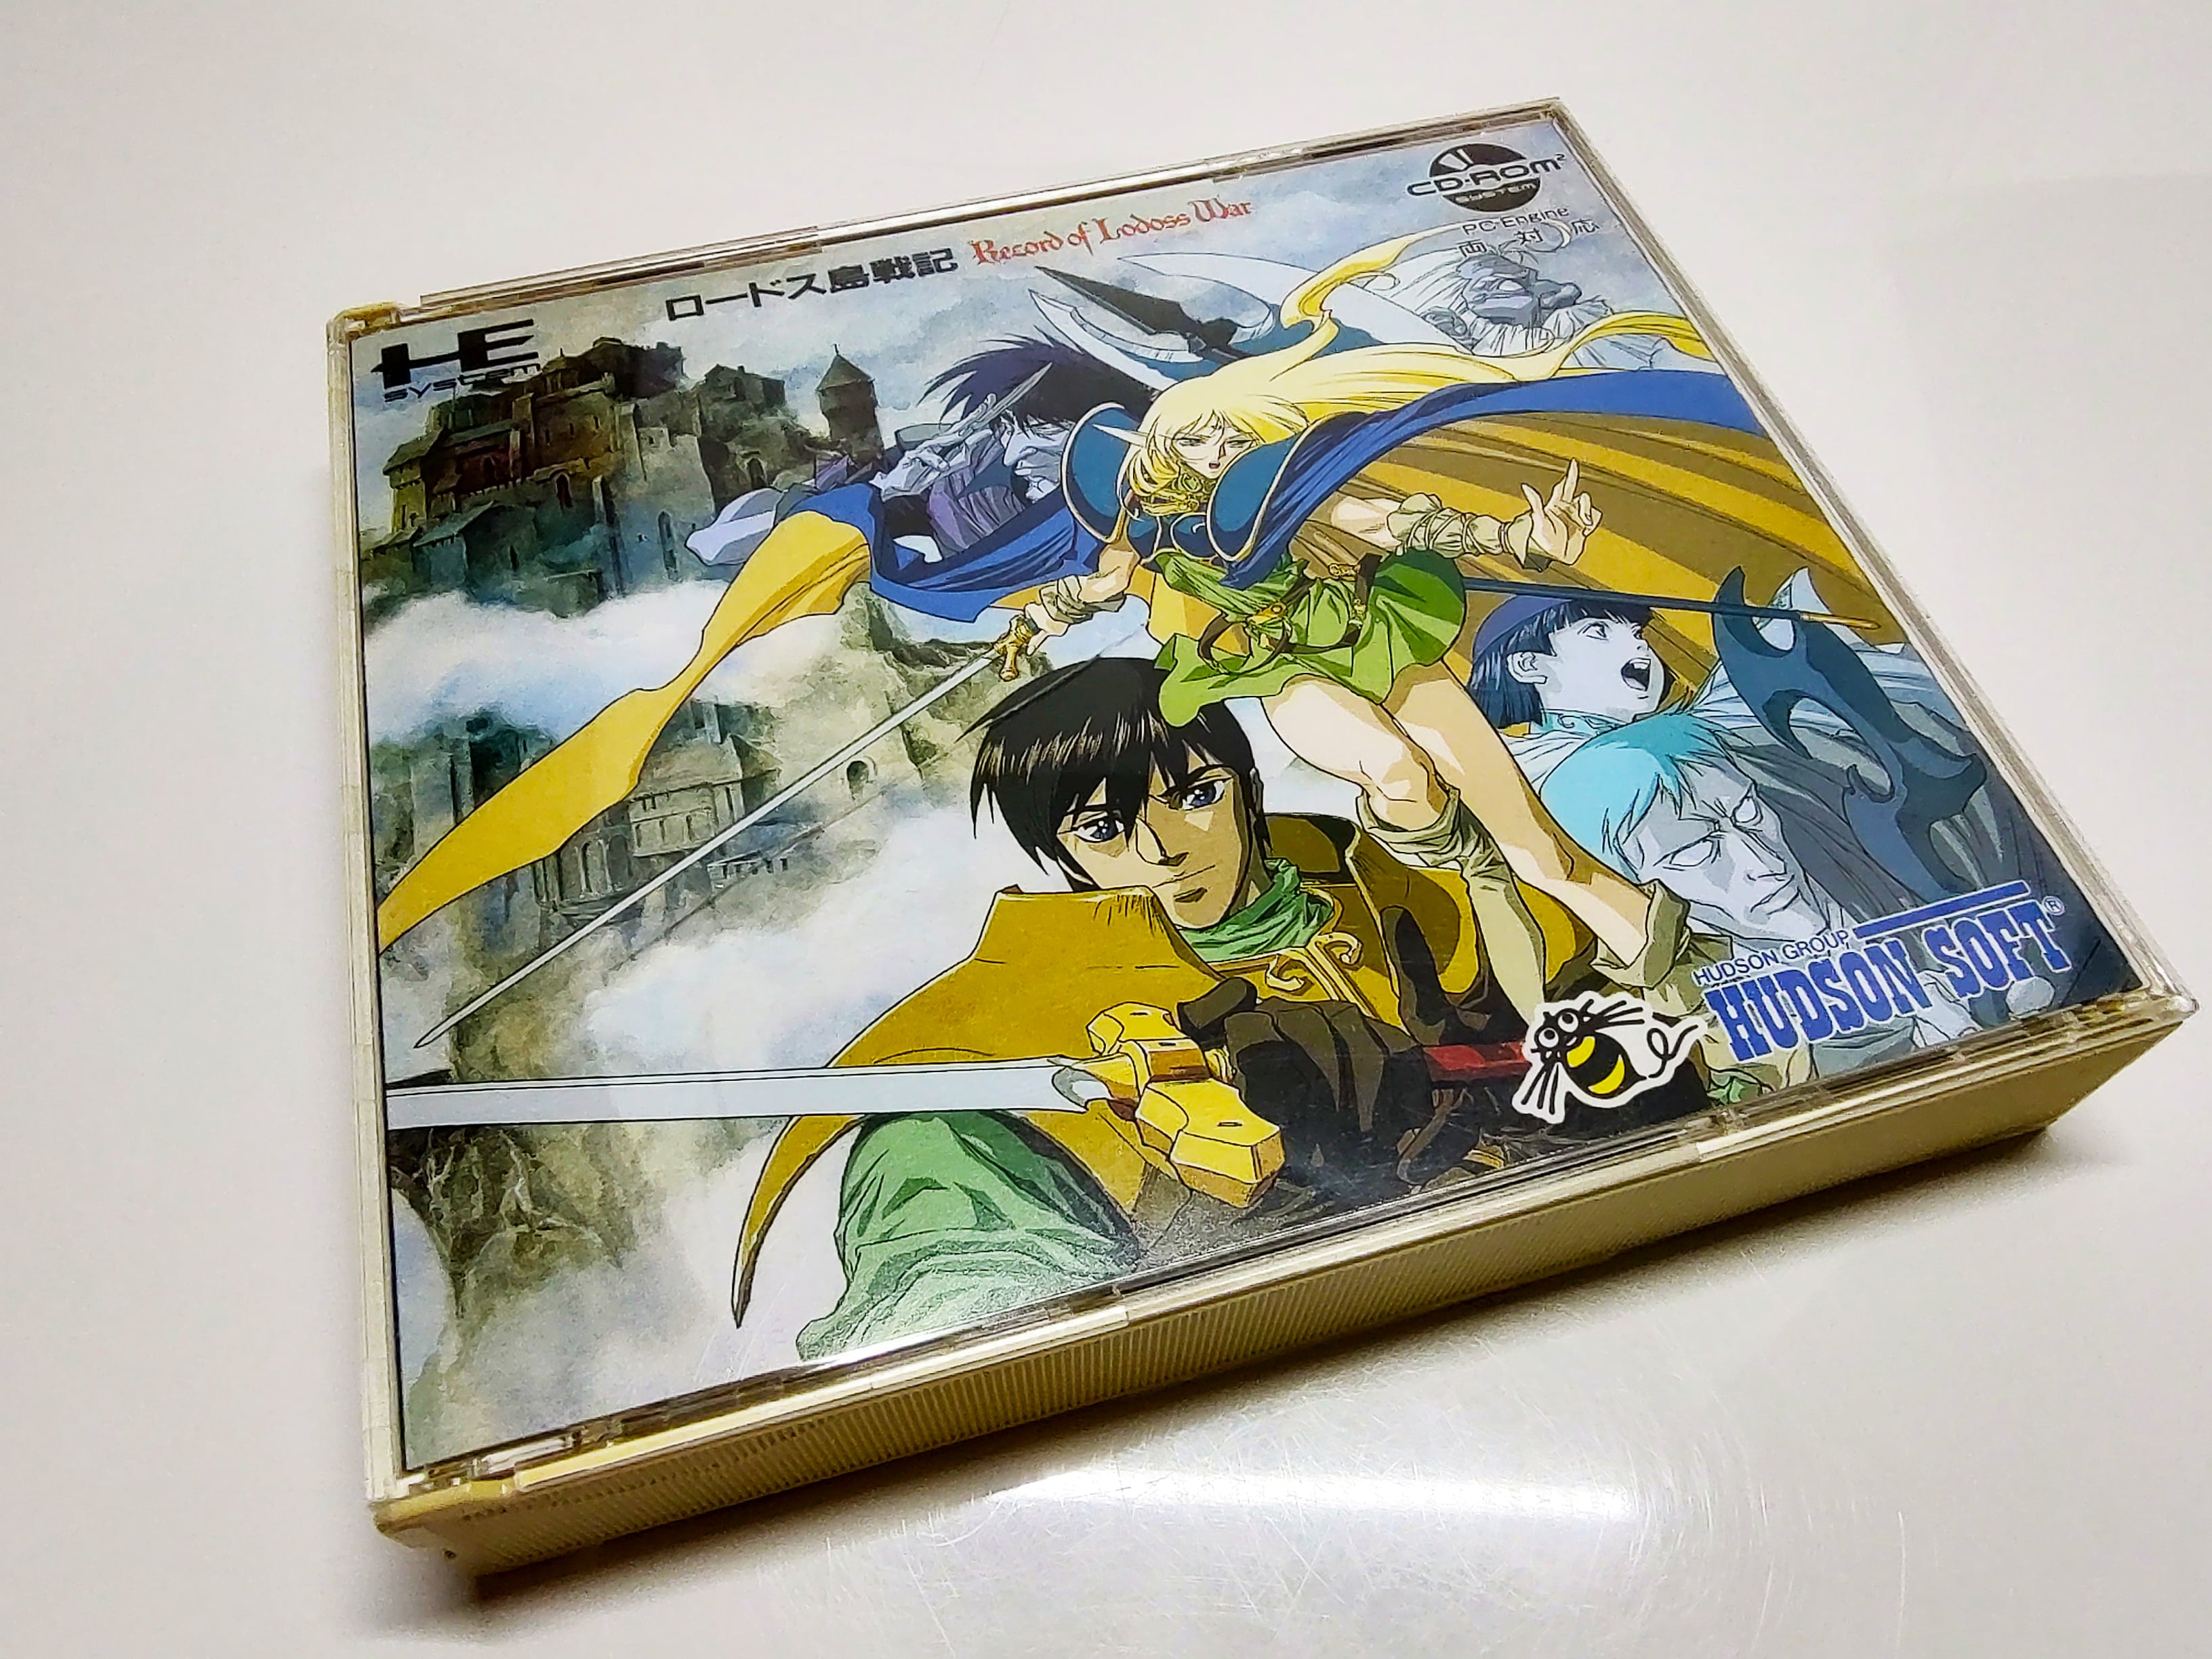 Record of Lodoss War | PC Engine Super CD | Case | Front